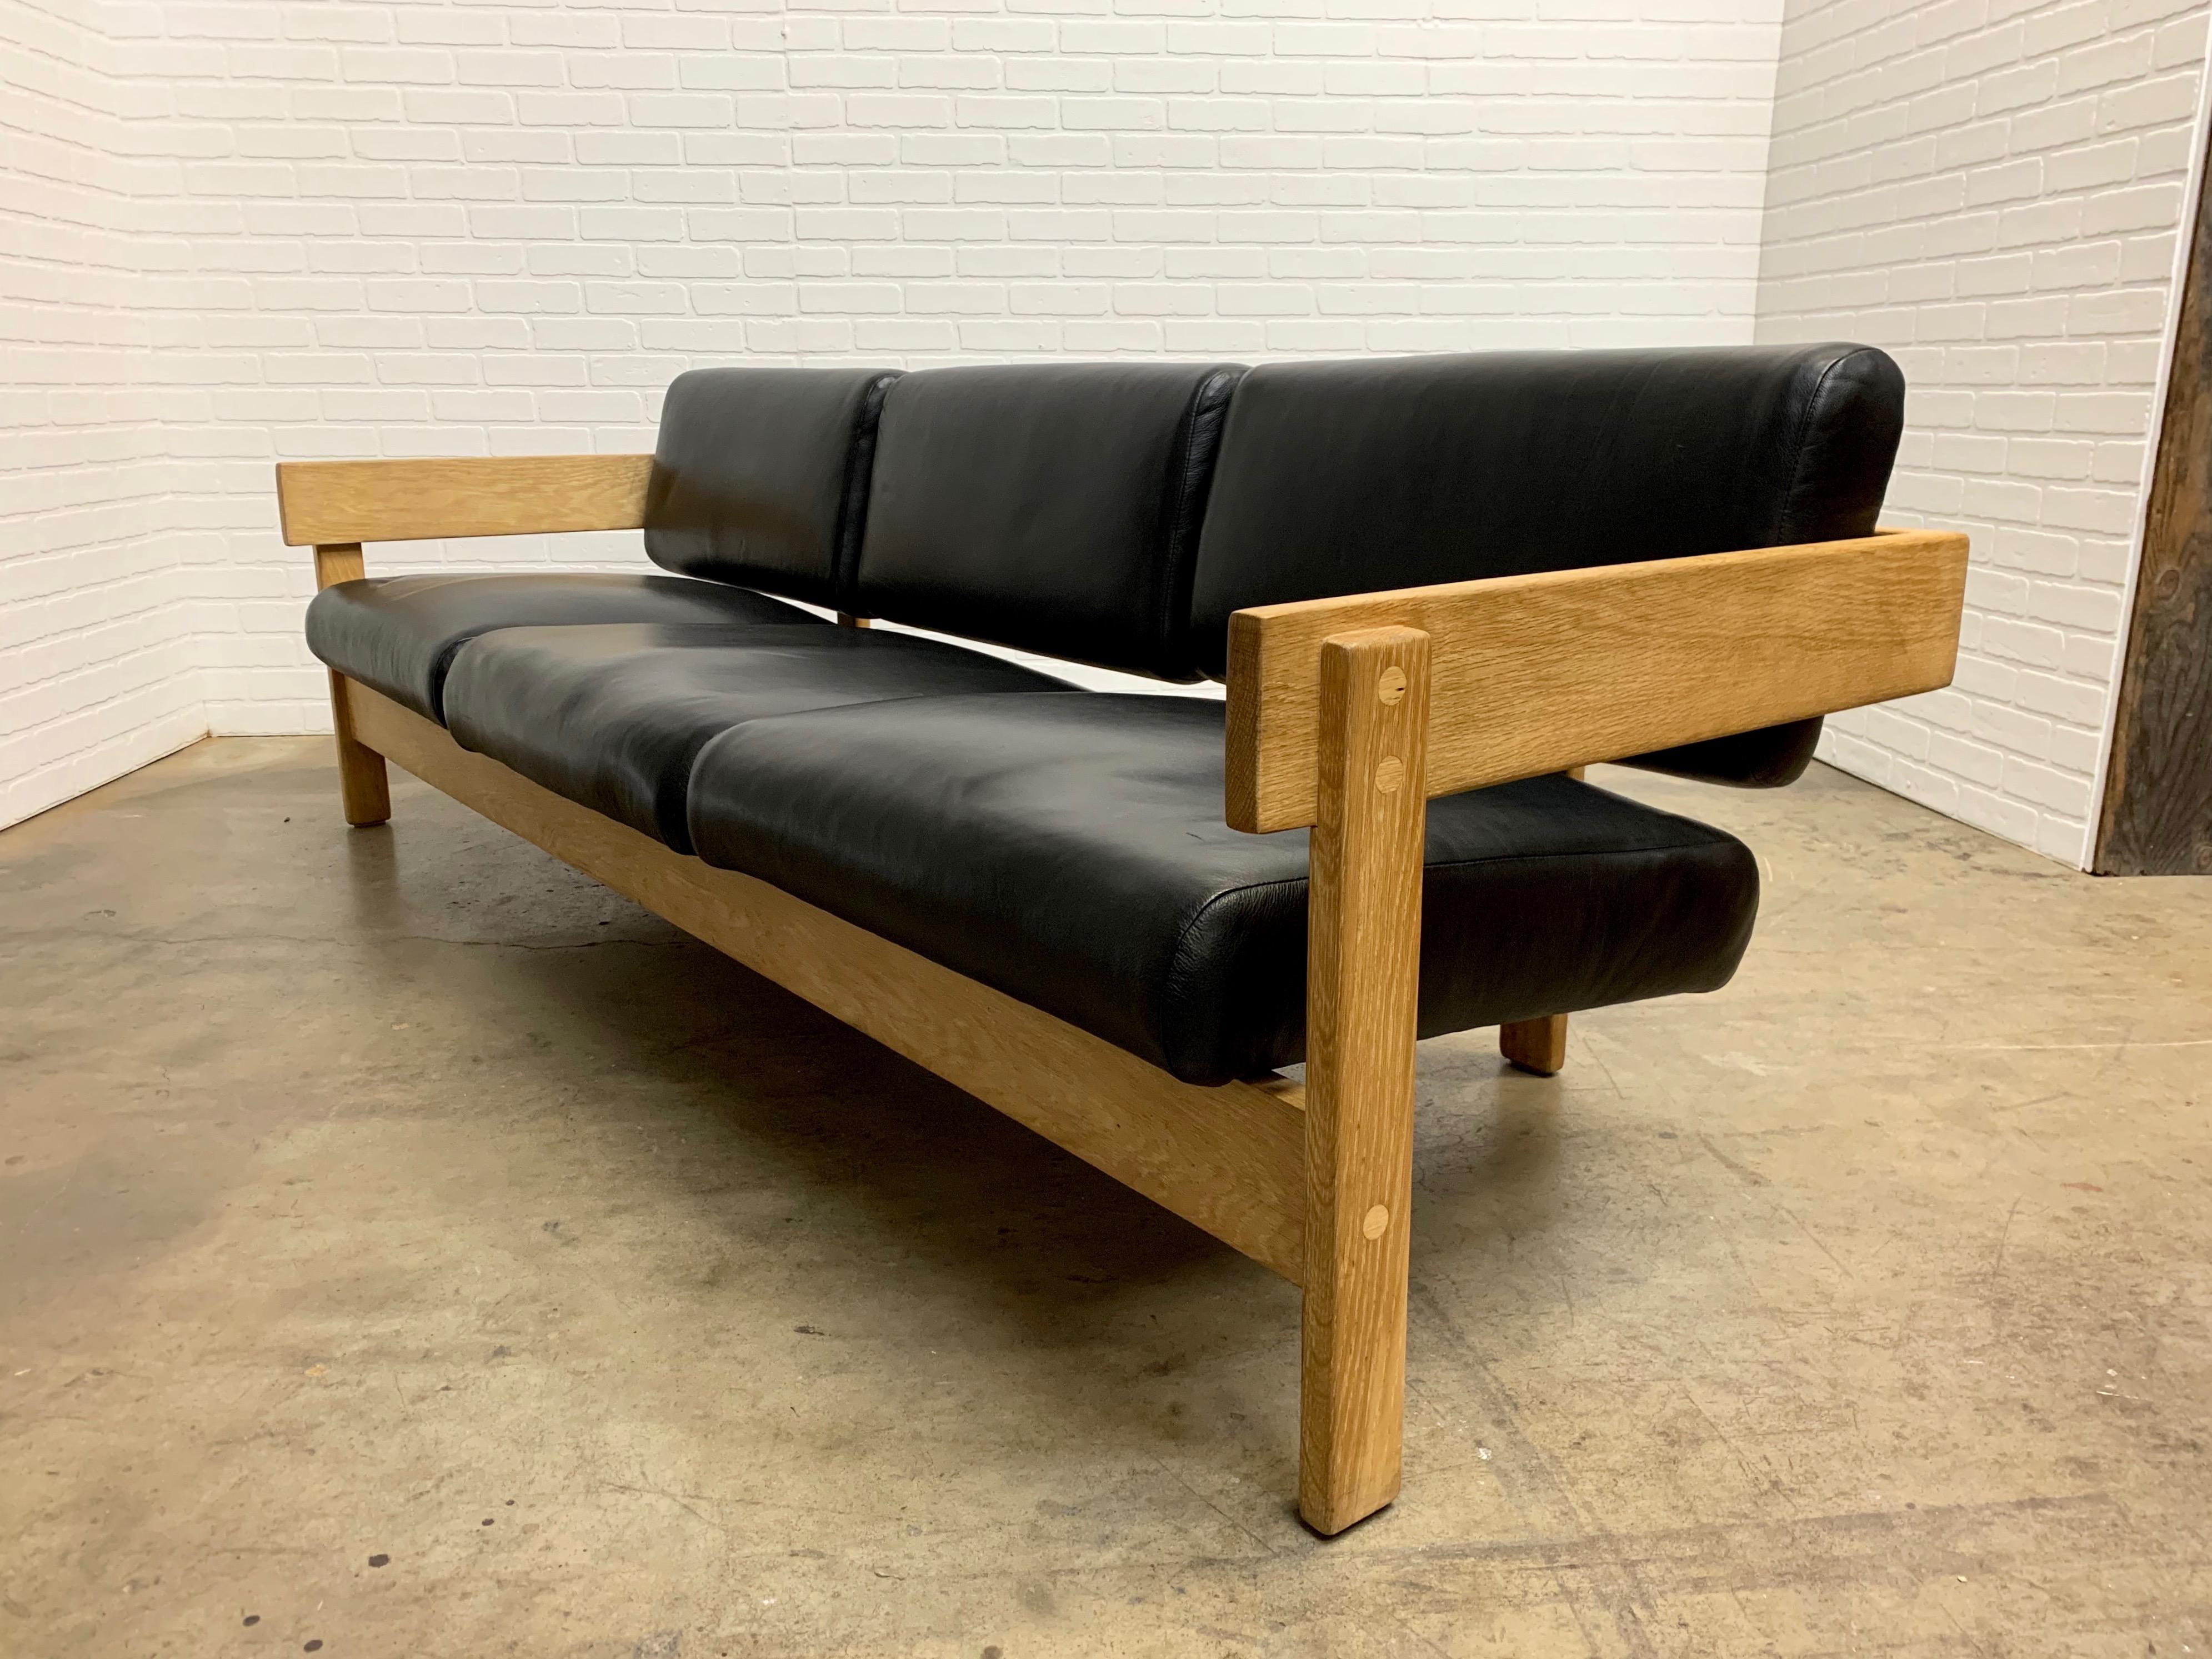 Raw white oak with supple black leather modernist sofa, very dramatic.